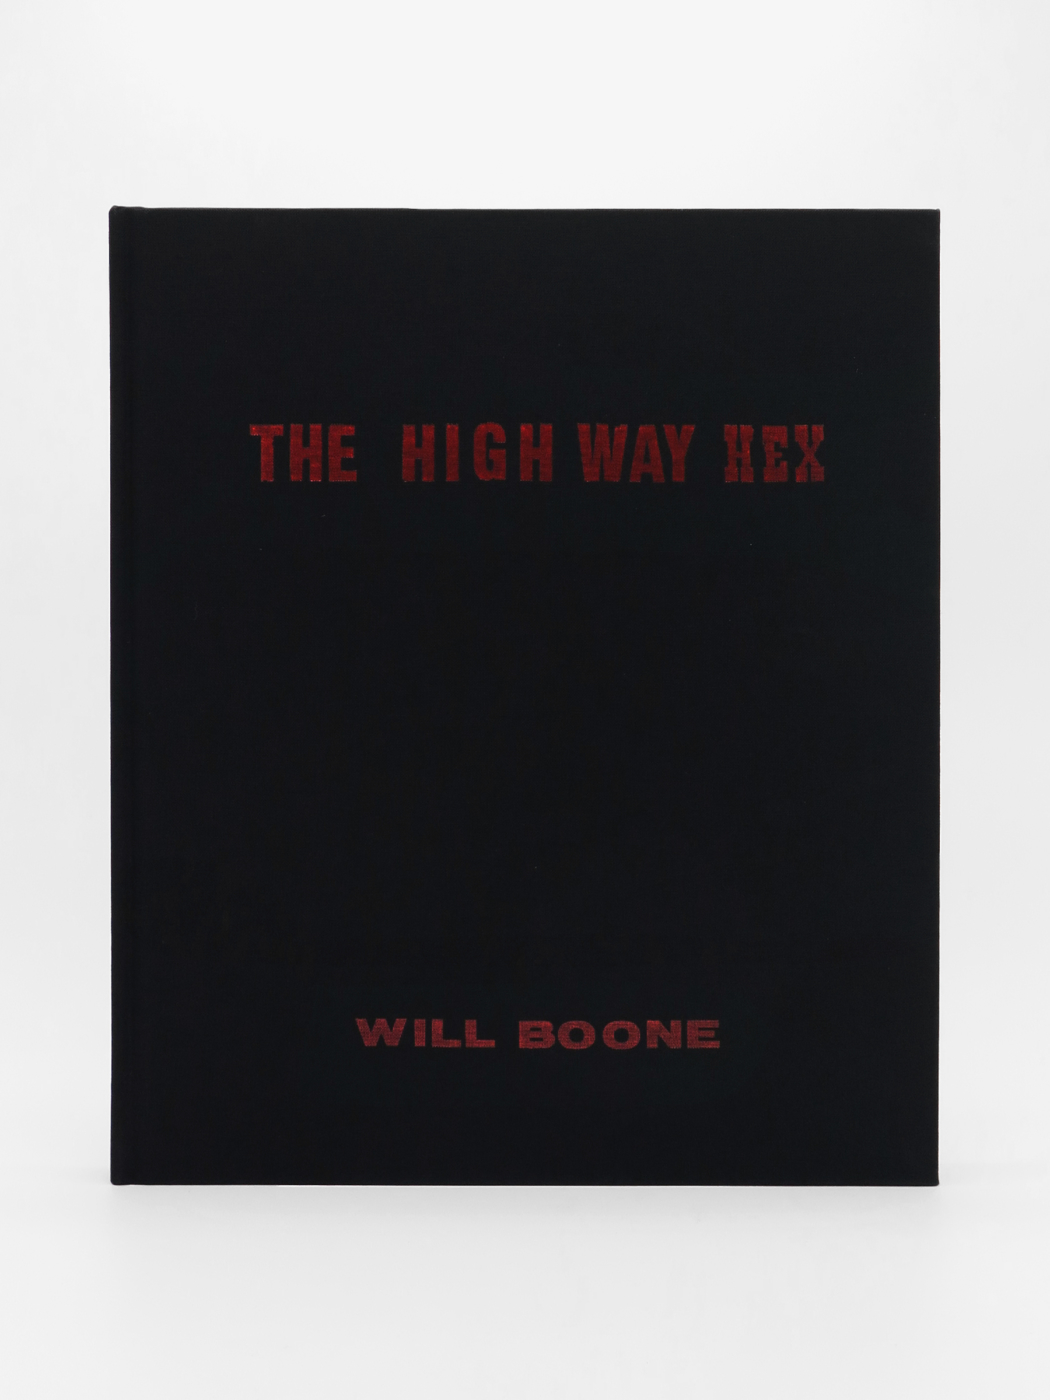 Will Boone, The Highway Hex